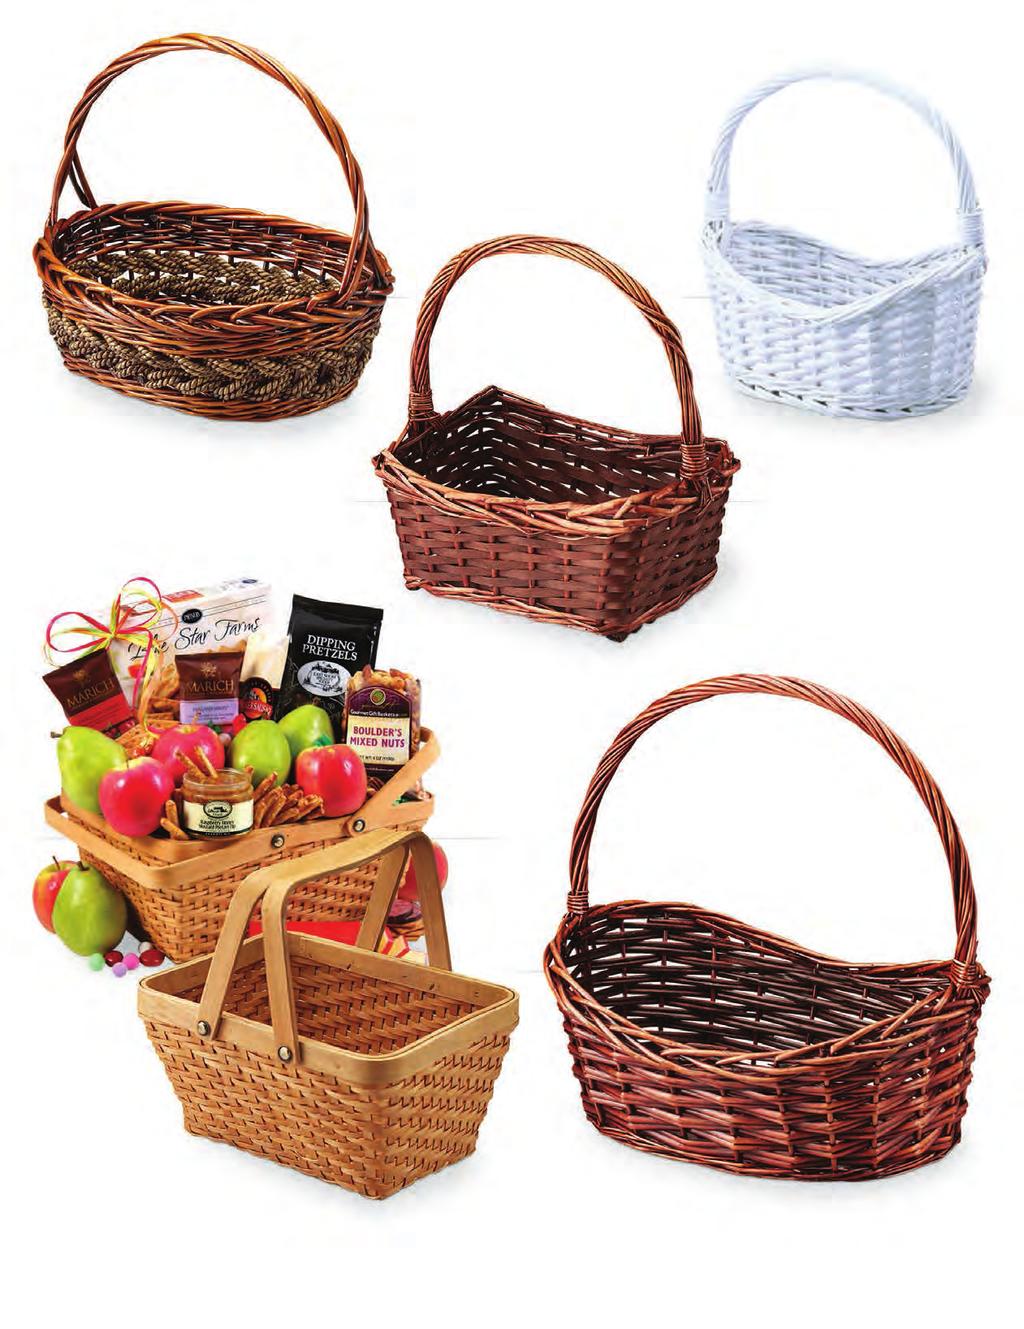 Baskets Without Plastic Liners 77008 Willow and Rope Oval Basket Brown stain 15 x 11 x 4.75 3/$8.99 ea. 2059 Oval Willow 10 x 7.75 x 3.5 Natural: 3/$5.29 ea.